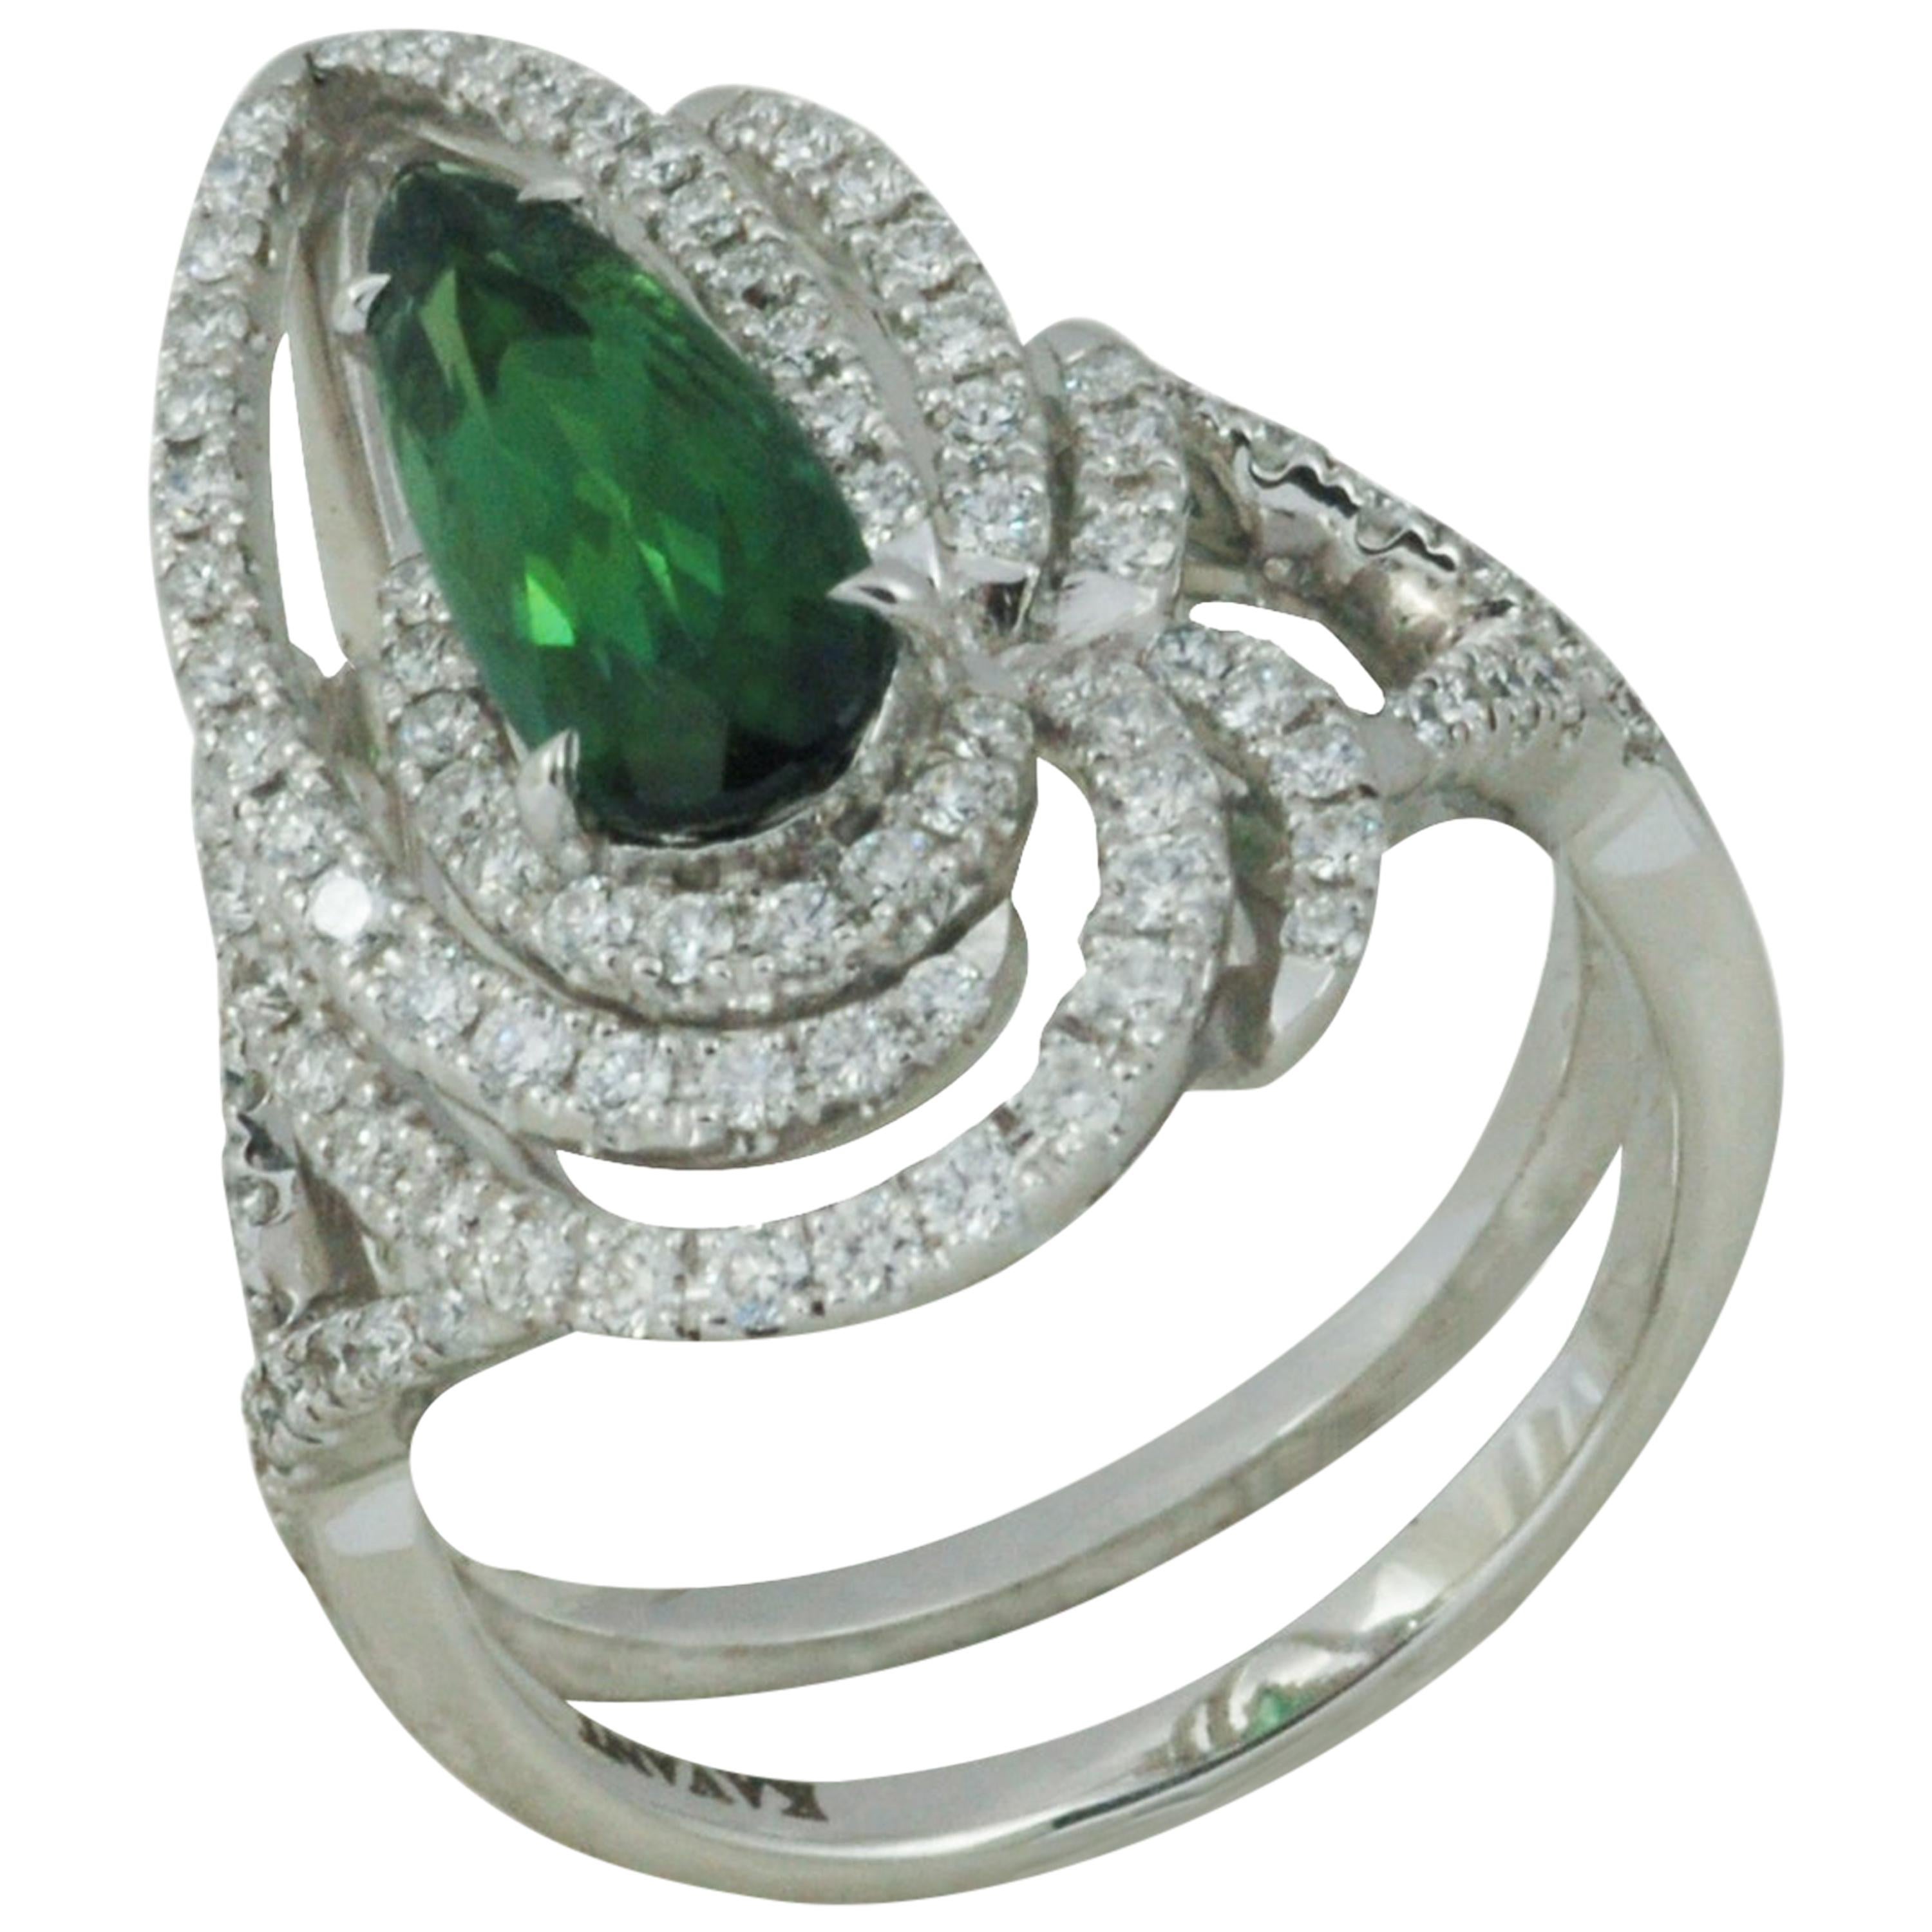 Green Tourmaline 1.45 Carat with Diamond 0.62 Ct Ring in 18k White Gold Settings